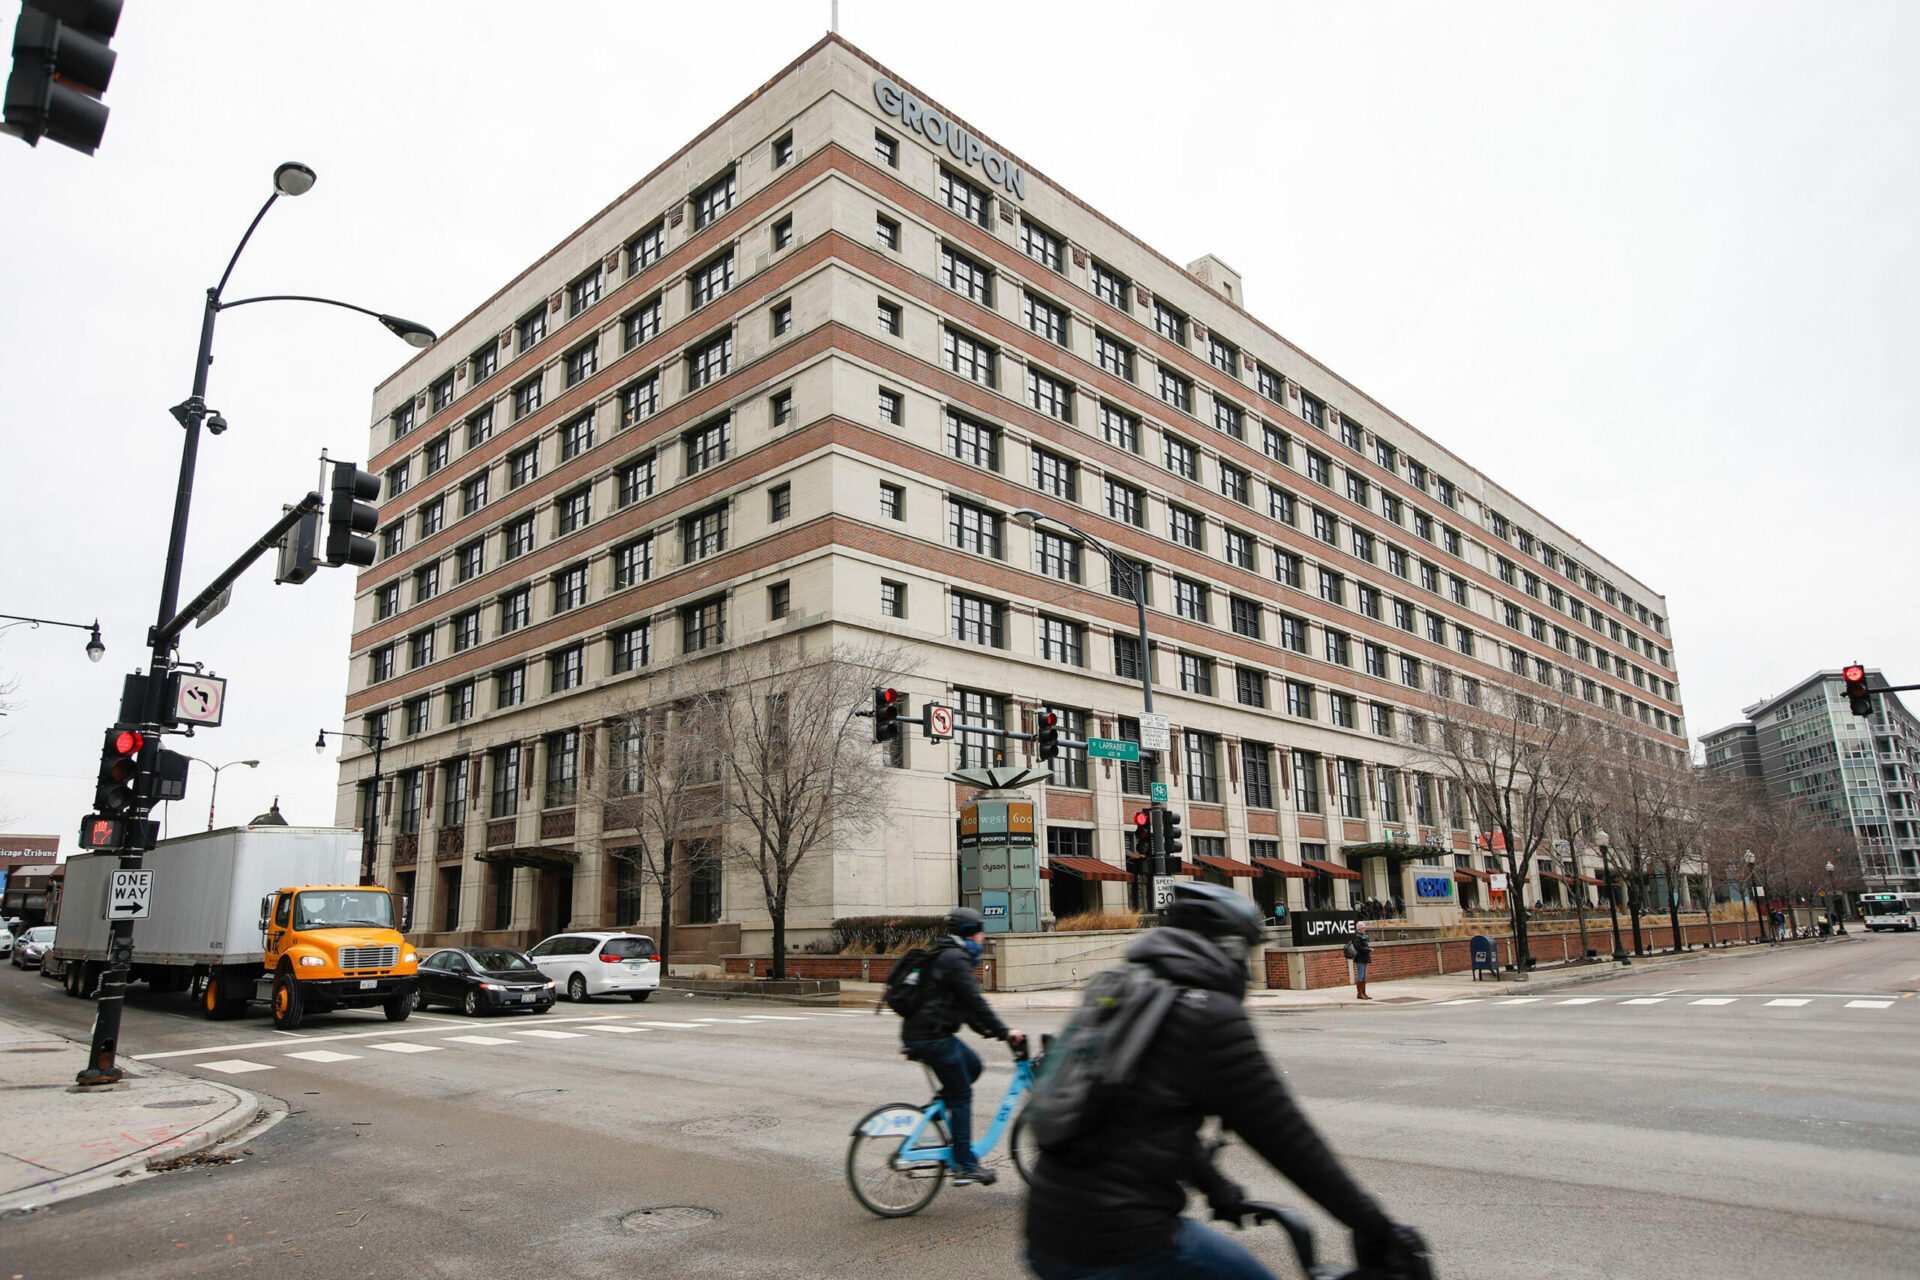 Groupon is downsizing once-massive Chicago headquarters